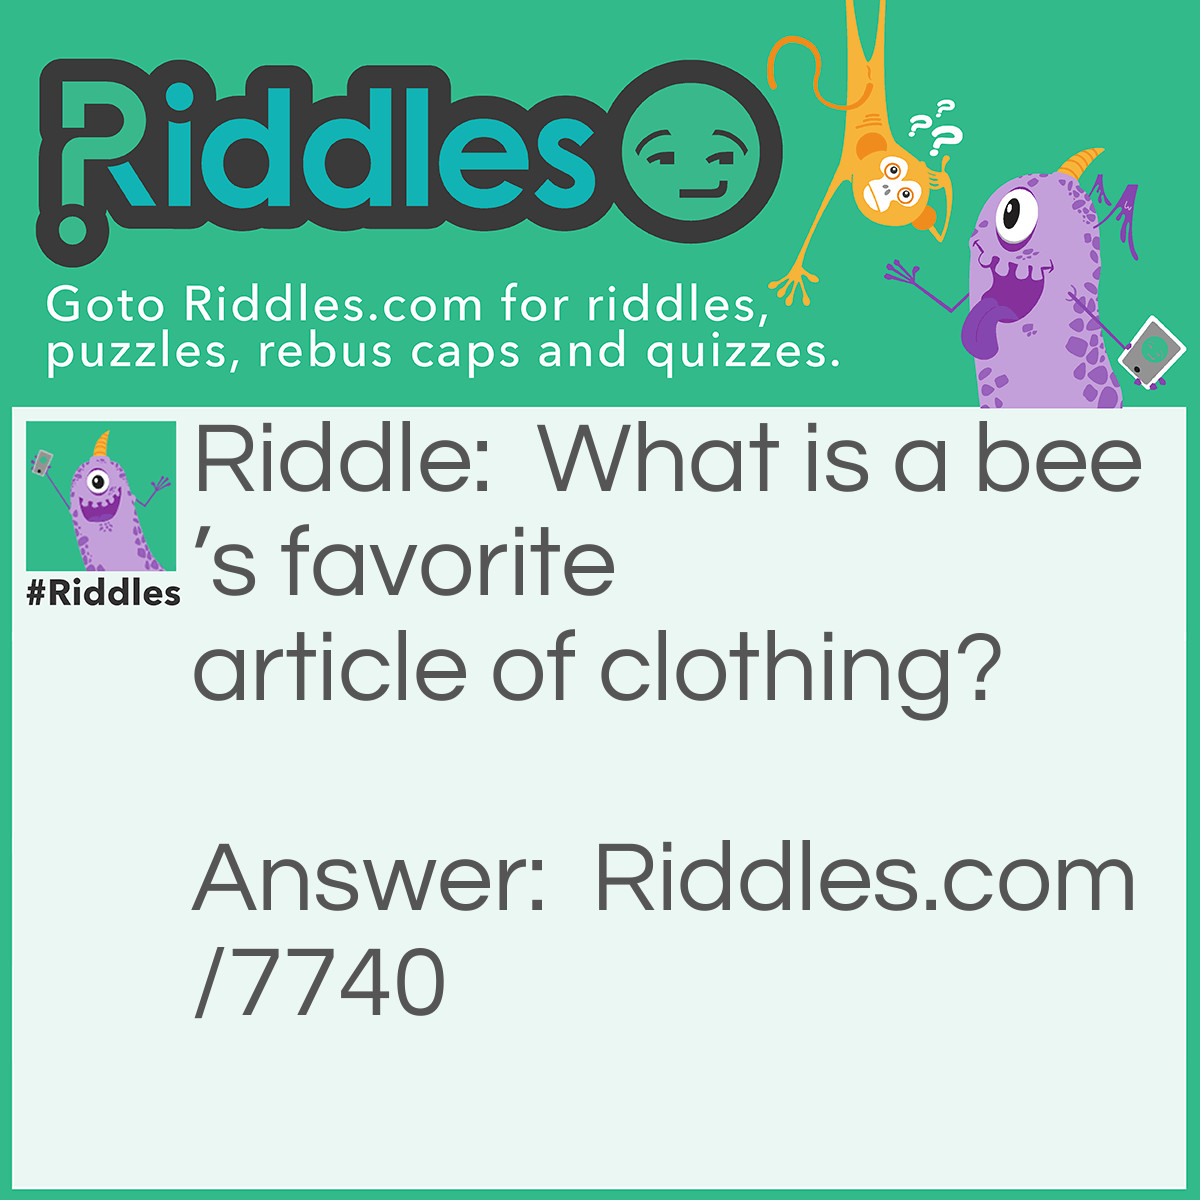 Riddle: What is a bee's favorite article of clothing? Answer: A beanie!